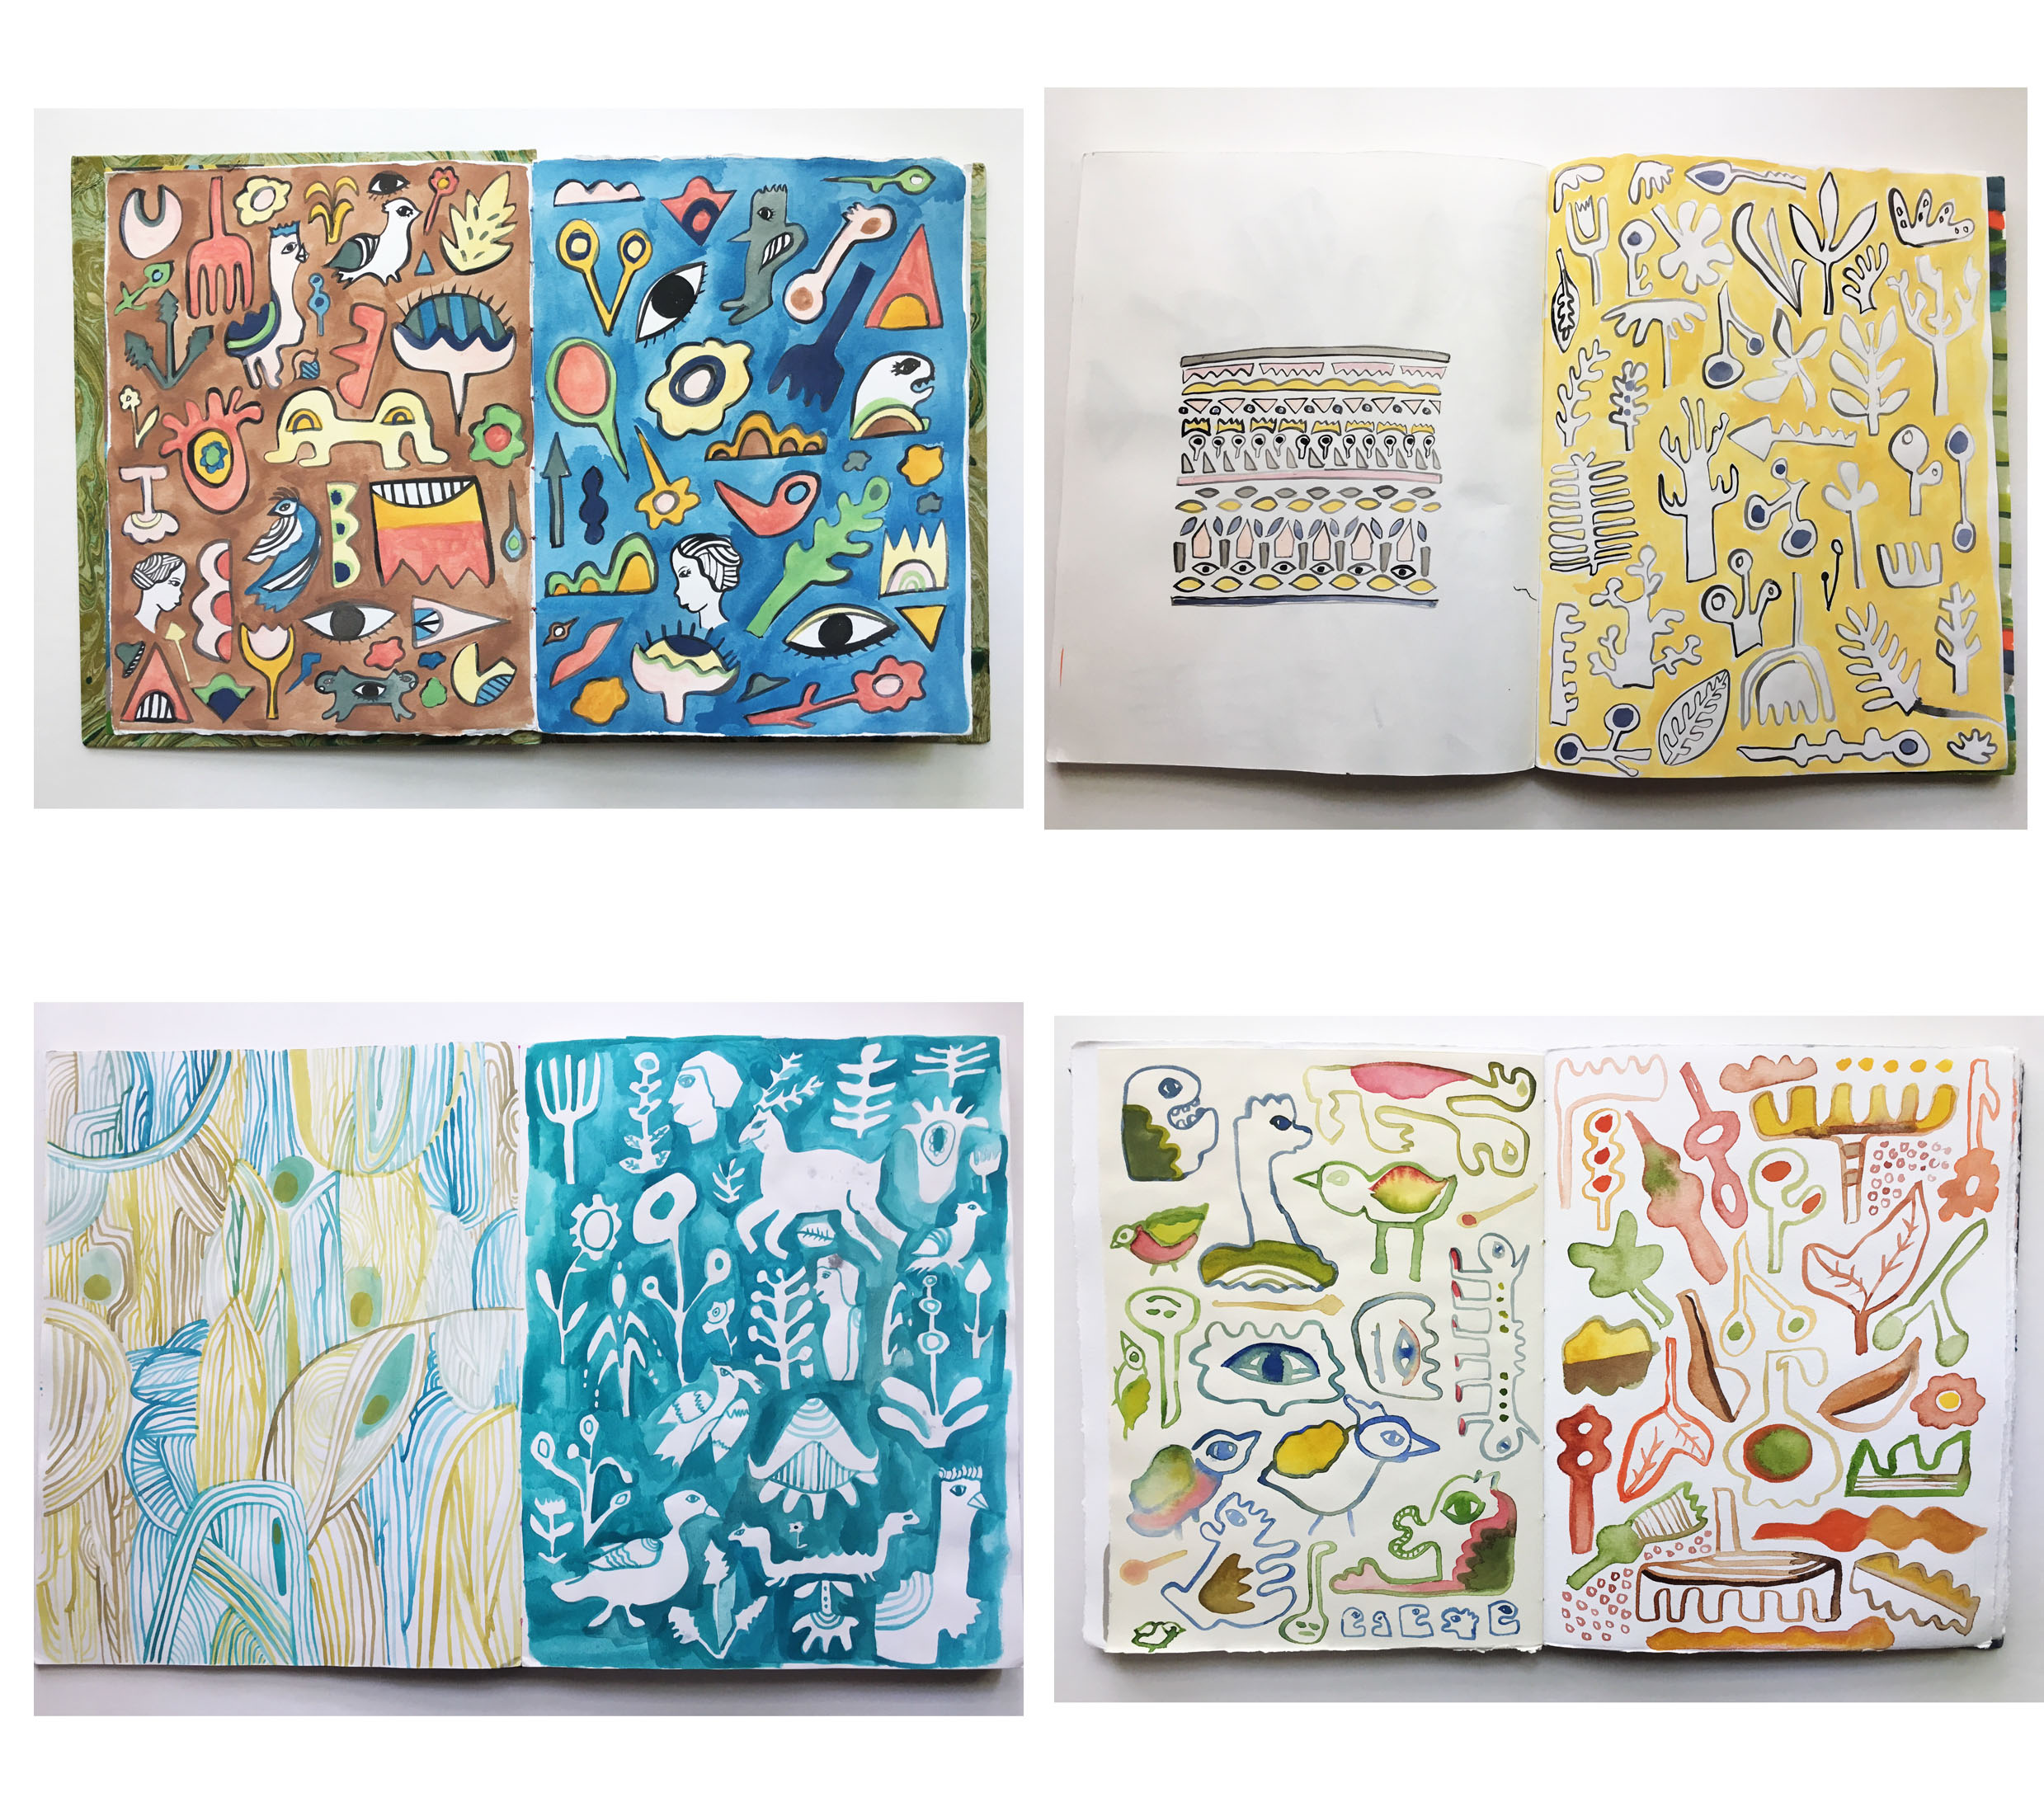 Quality Wholesale Sketchbooks For Beginners And Artists 